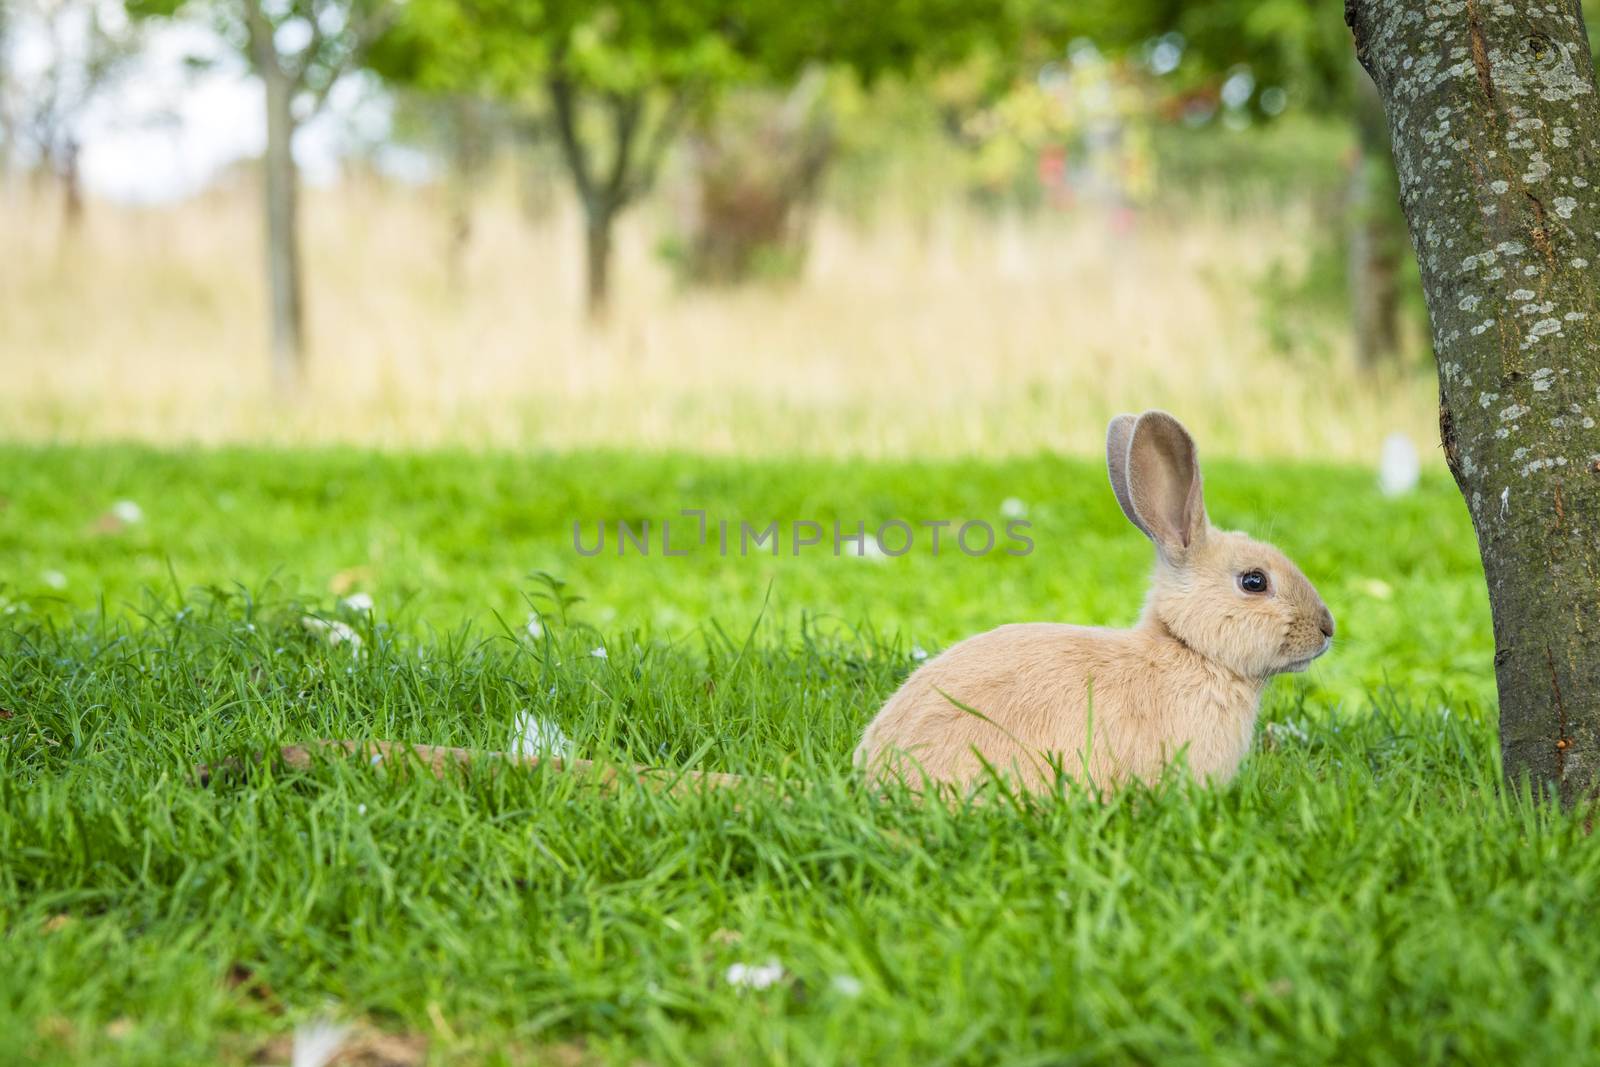 Rabbit under a tree in a garden at Easter in idyllic surroundings in green nature